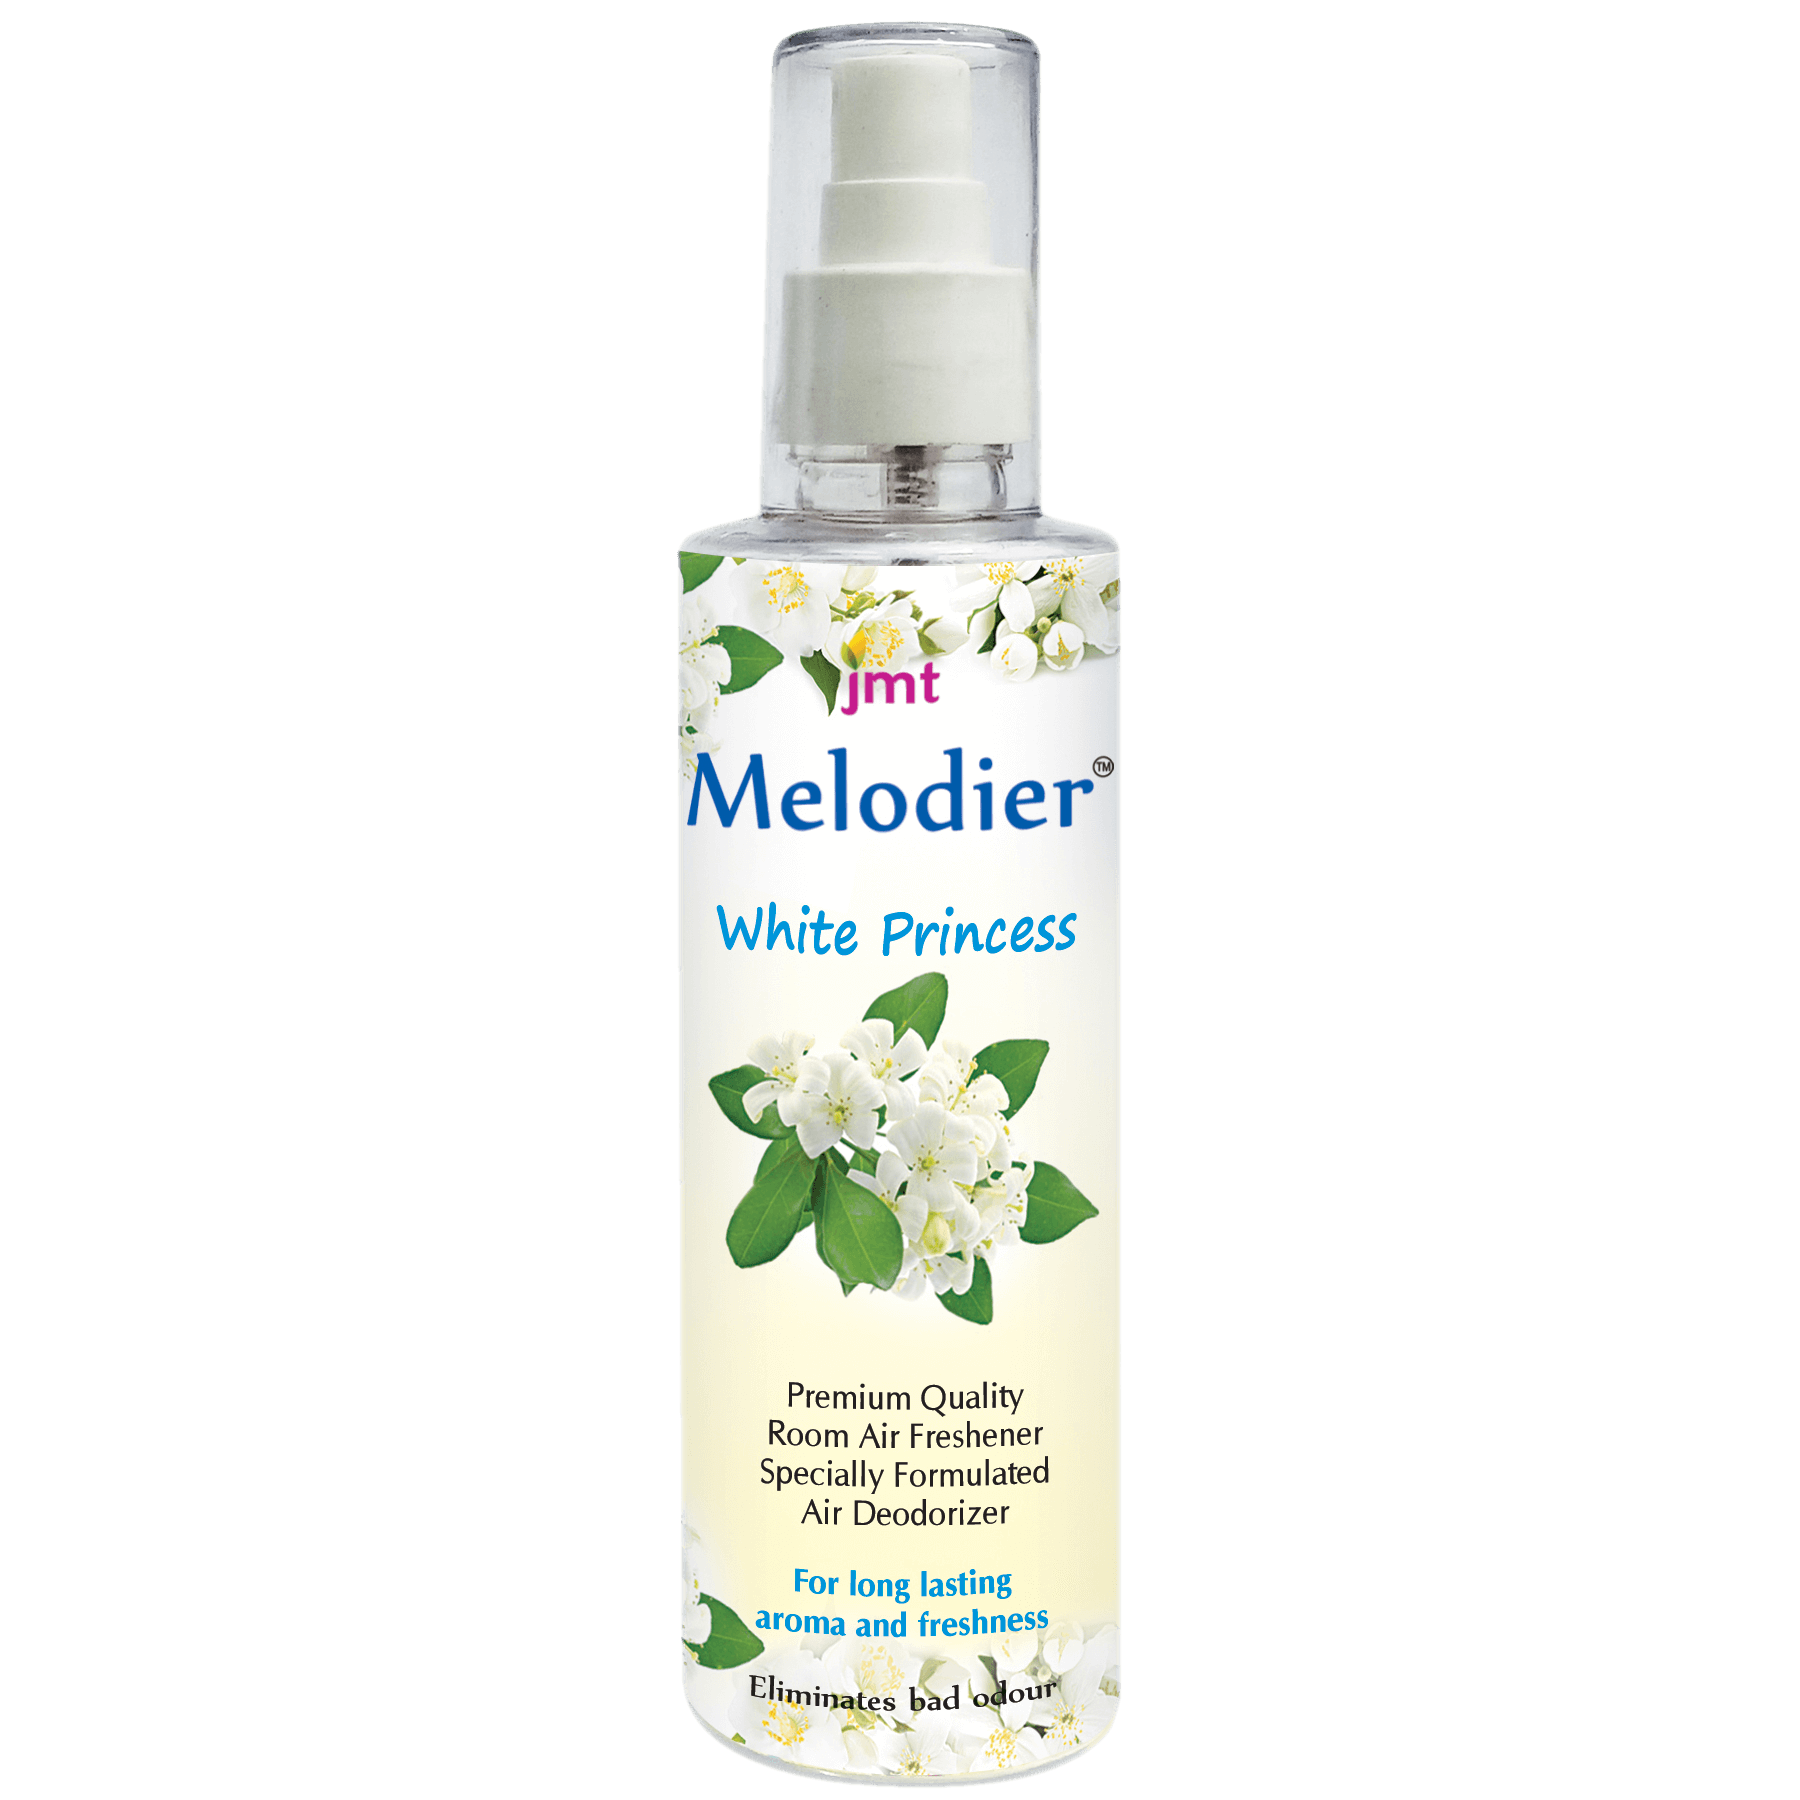 Buy 7 at the price of 5 - Pack of 7 x 200ml Melodier Room Air Freshener and A True Deodorizer